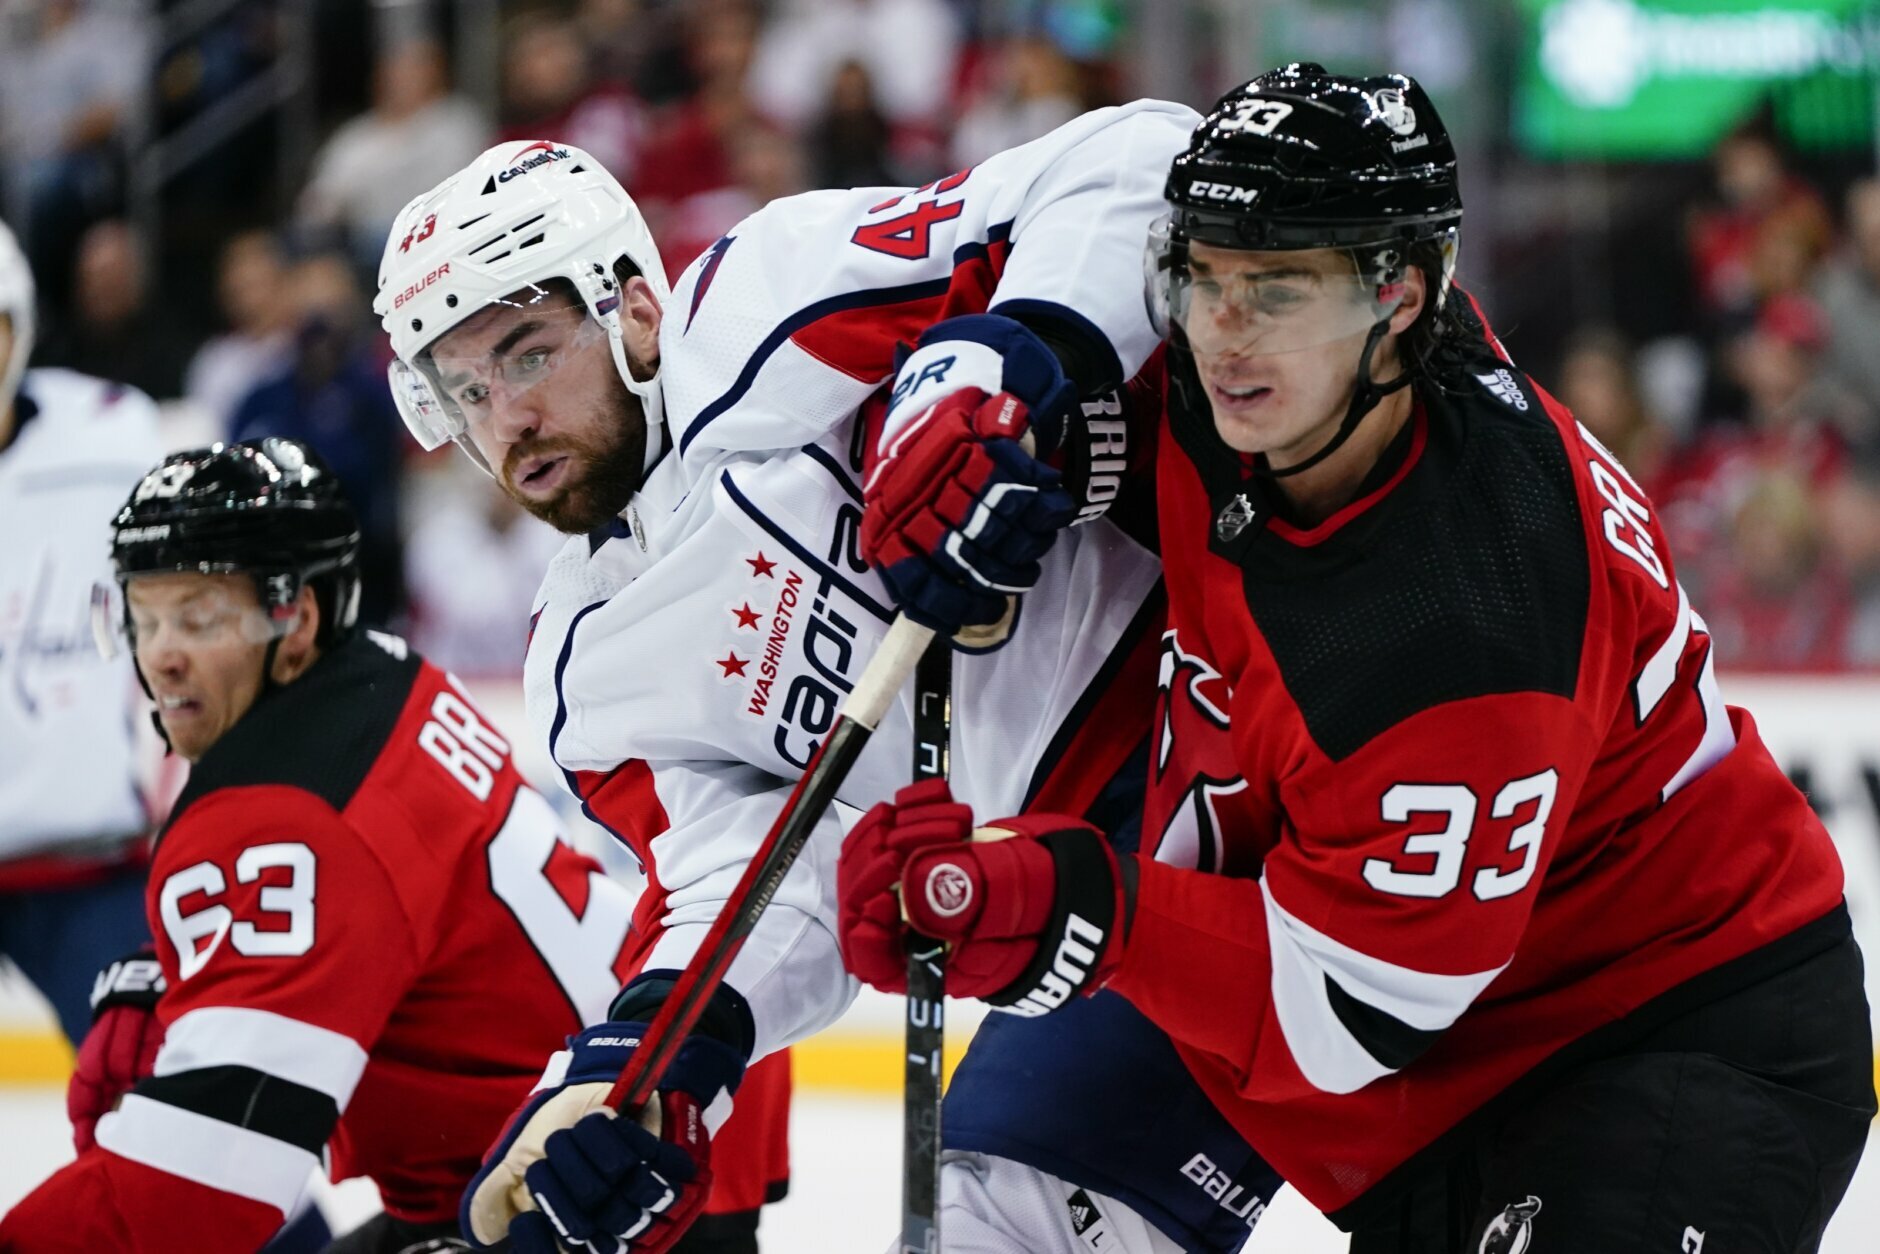 Washington Capitals' Tom Wilson (43) jostles for position with New Jersey Devils' Ryan Graves (33) during the second period of an NHL hockey game Thursday, Oct. 21, 2021, in Newark, N.J. (AP Photo/Frank Franklin II)